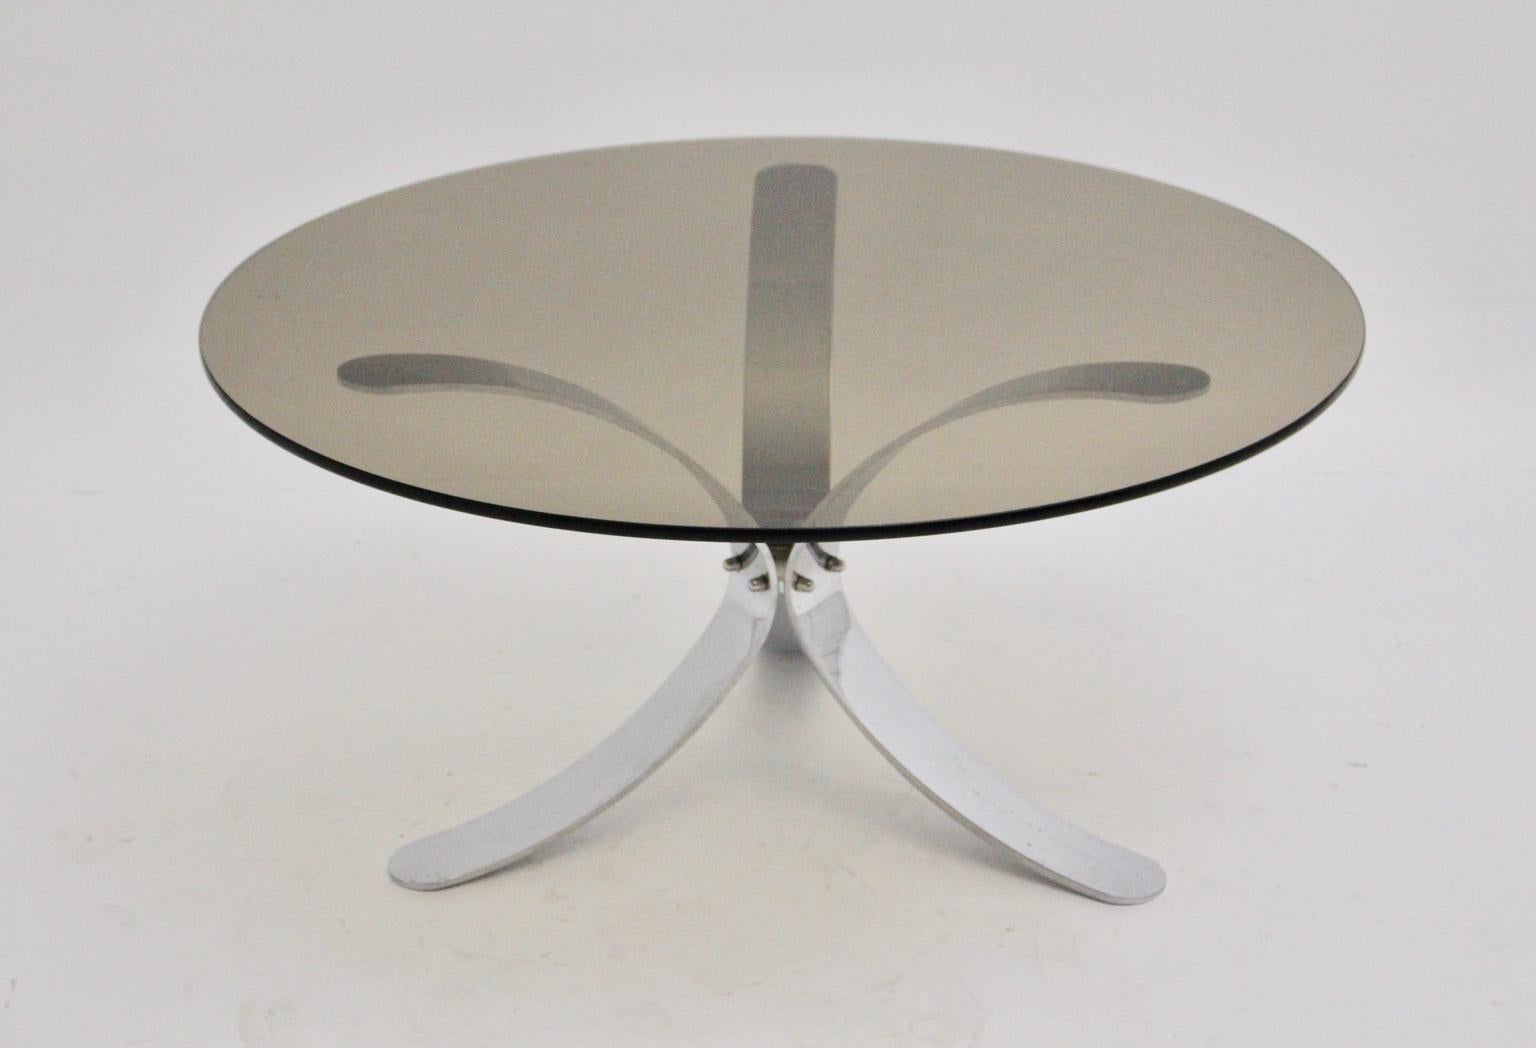 This presented coffee table or sofa table was designed and made circa 1970 in Germany.
The three-legged chromed metal base features a curved shape and is fixed in the middle with chromed screws.
Furthermore the round smoked glass top features a